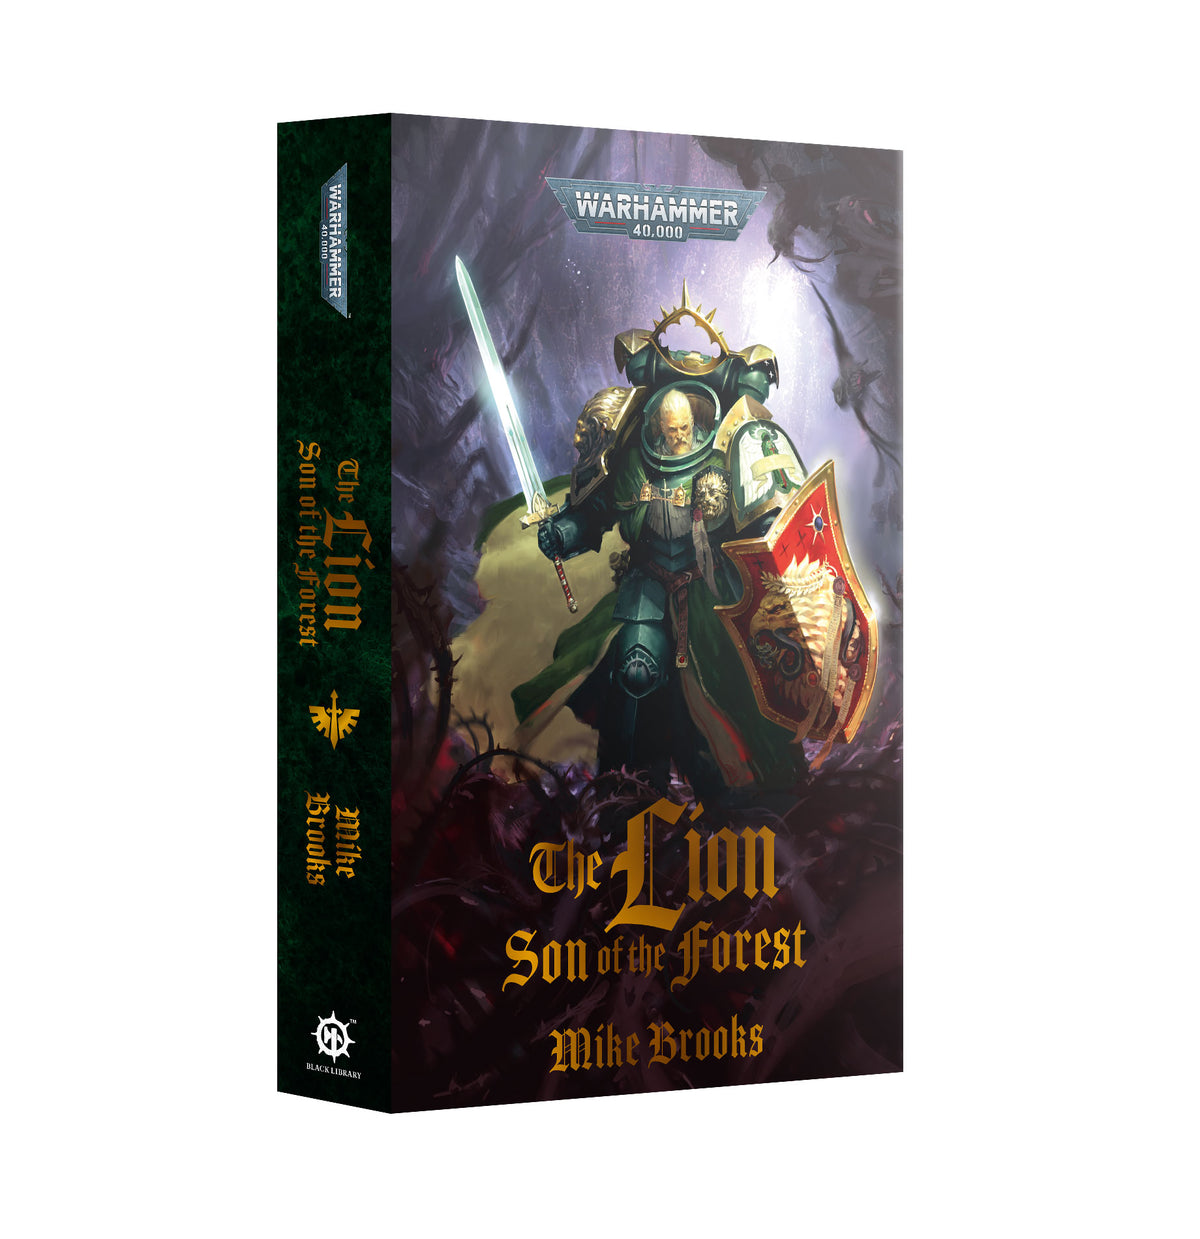 Warhammer 40K: THE LION: SON OF THE FOREST (PB)